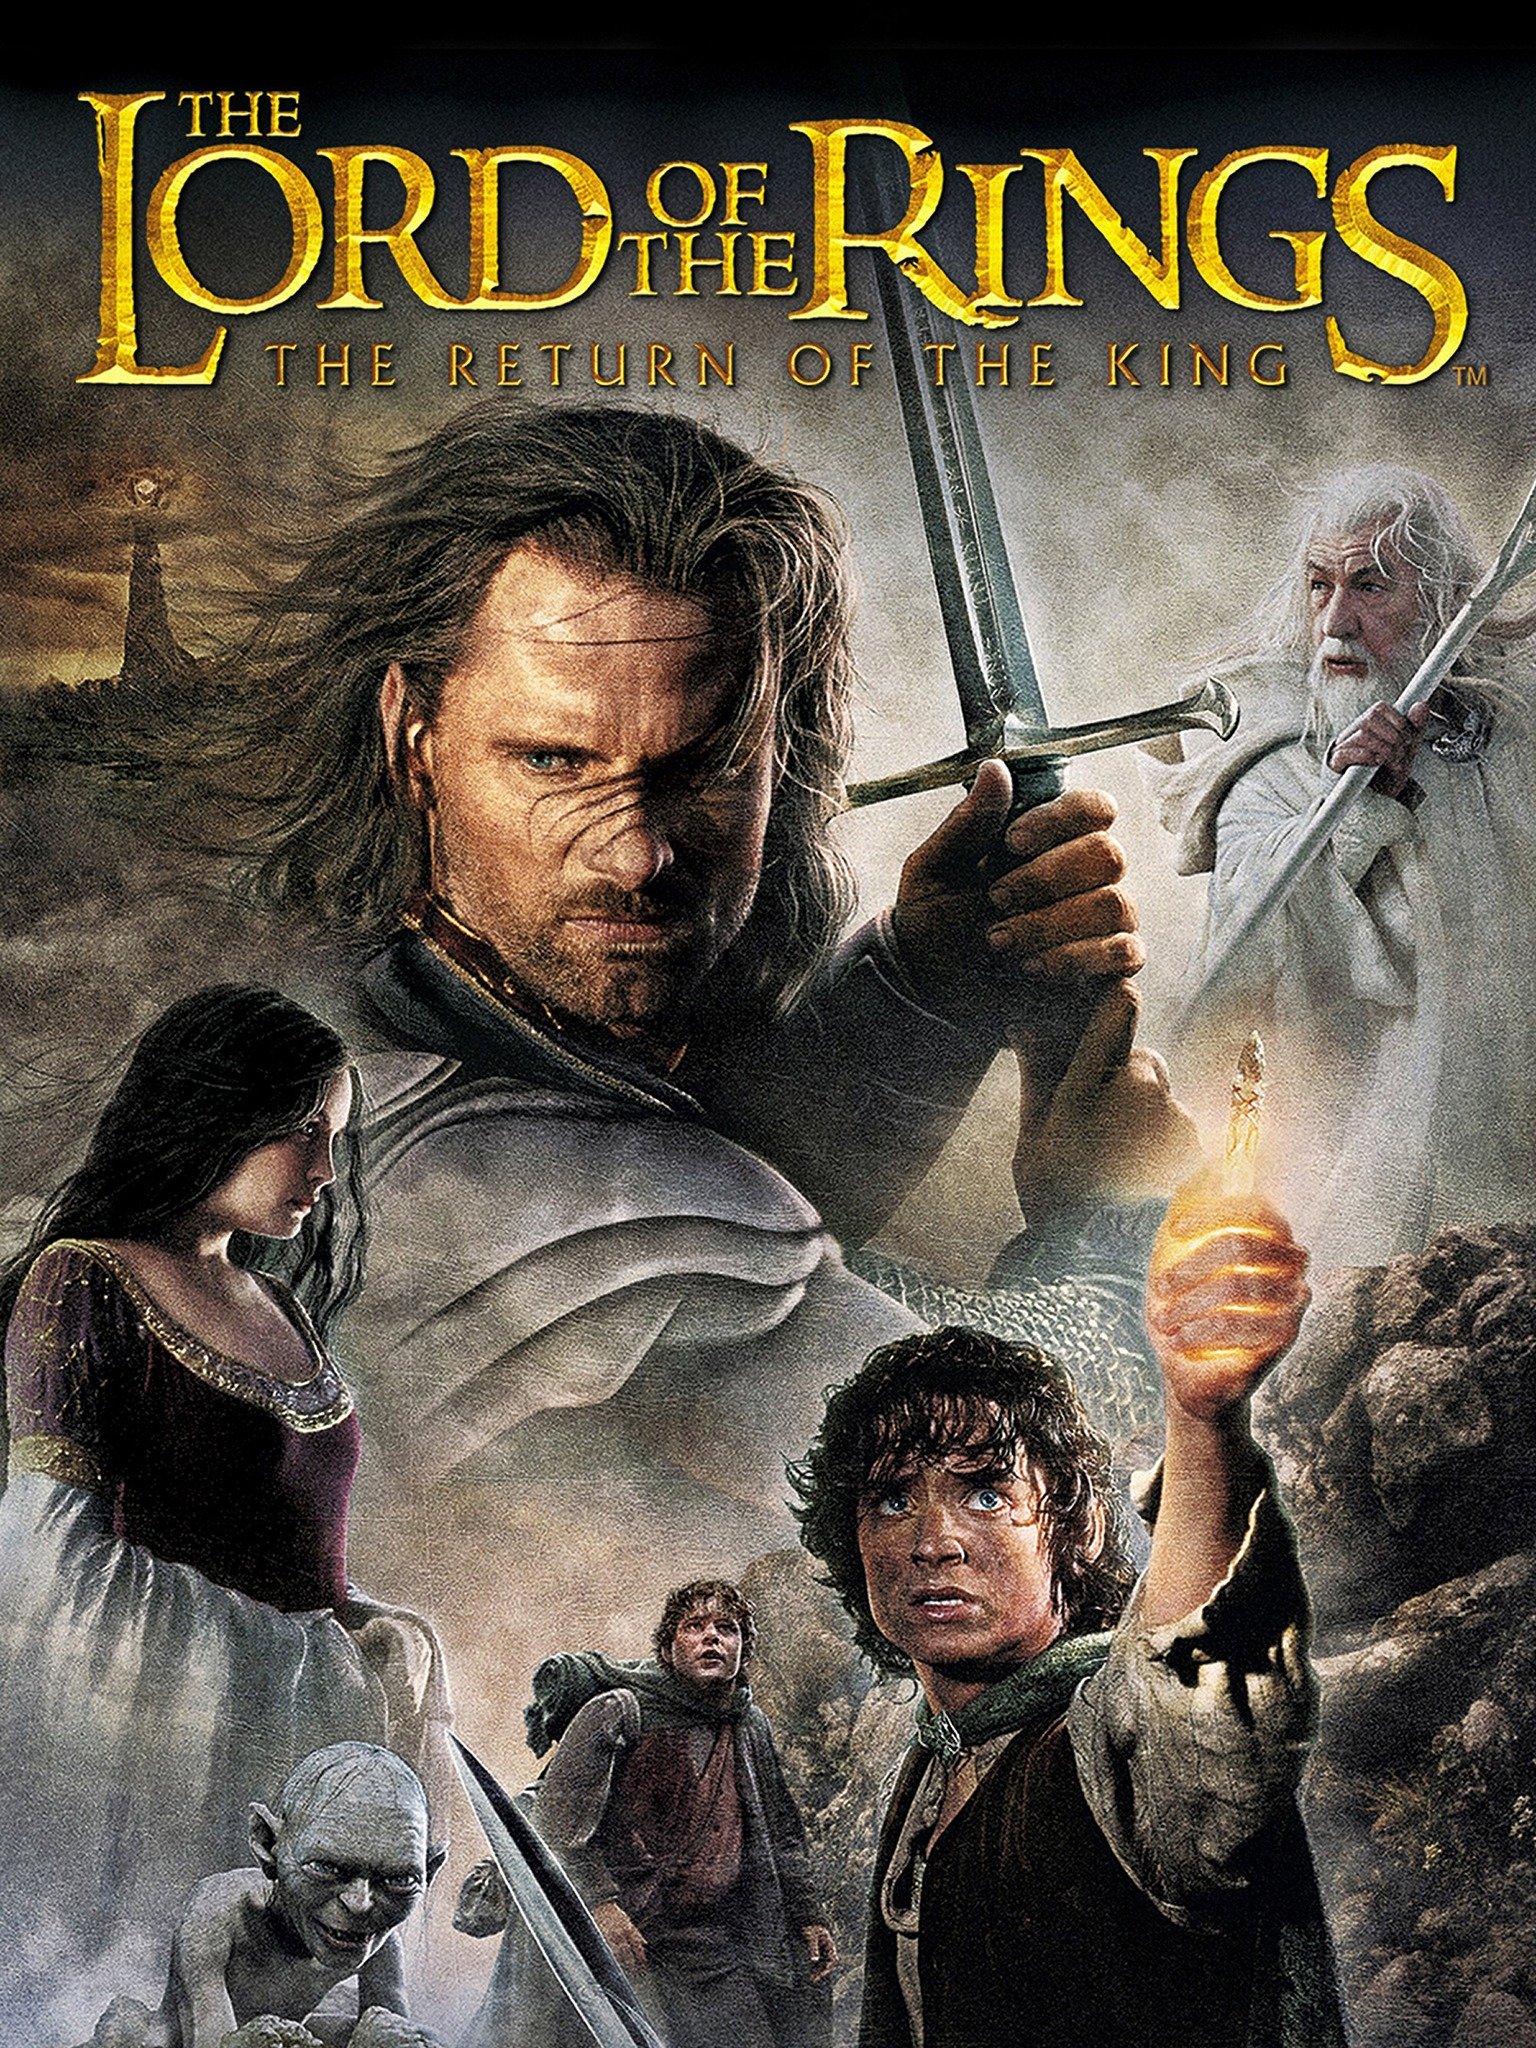 download english subtitles for lord of the rings extended trilogy